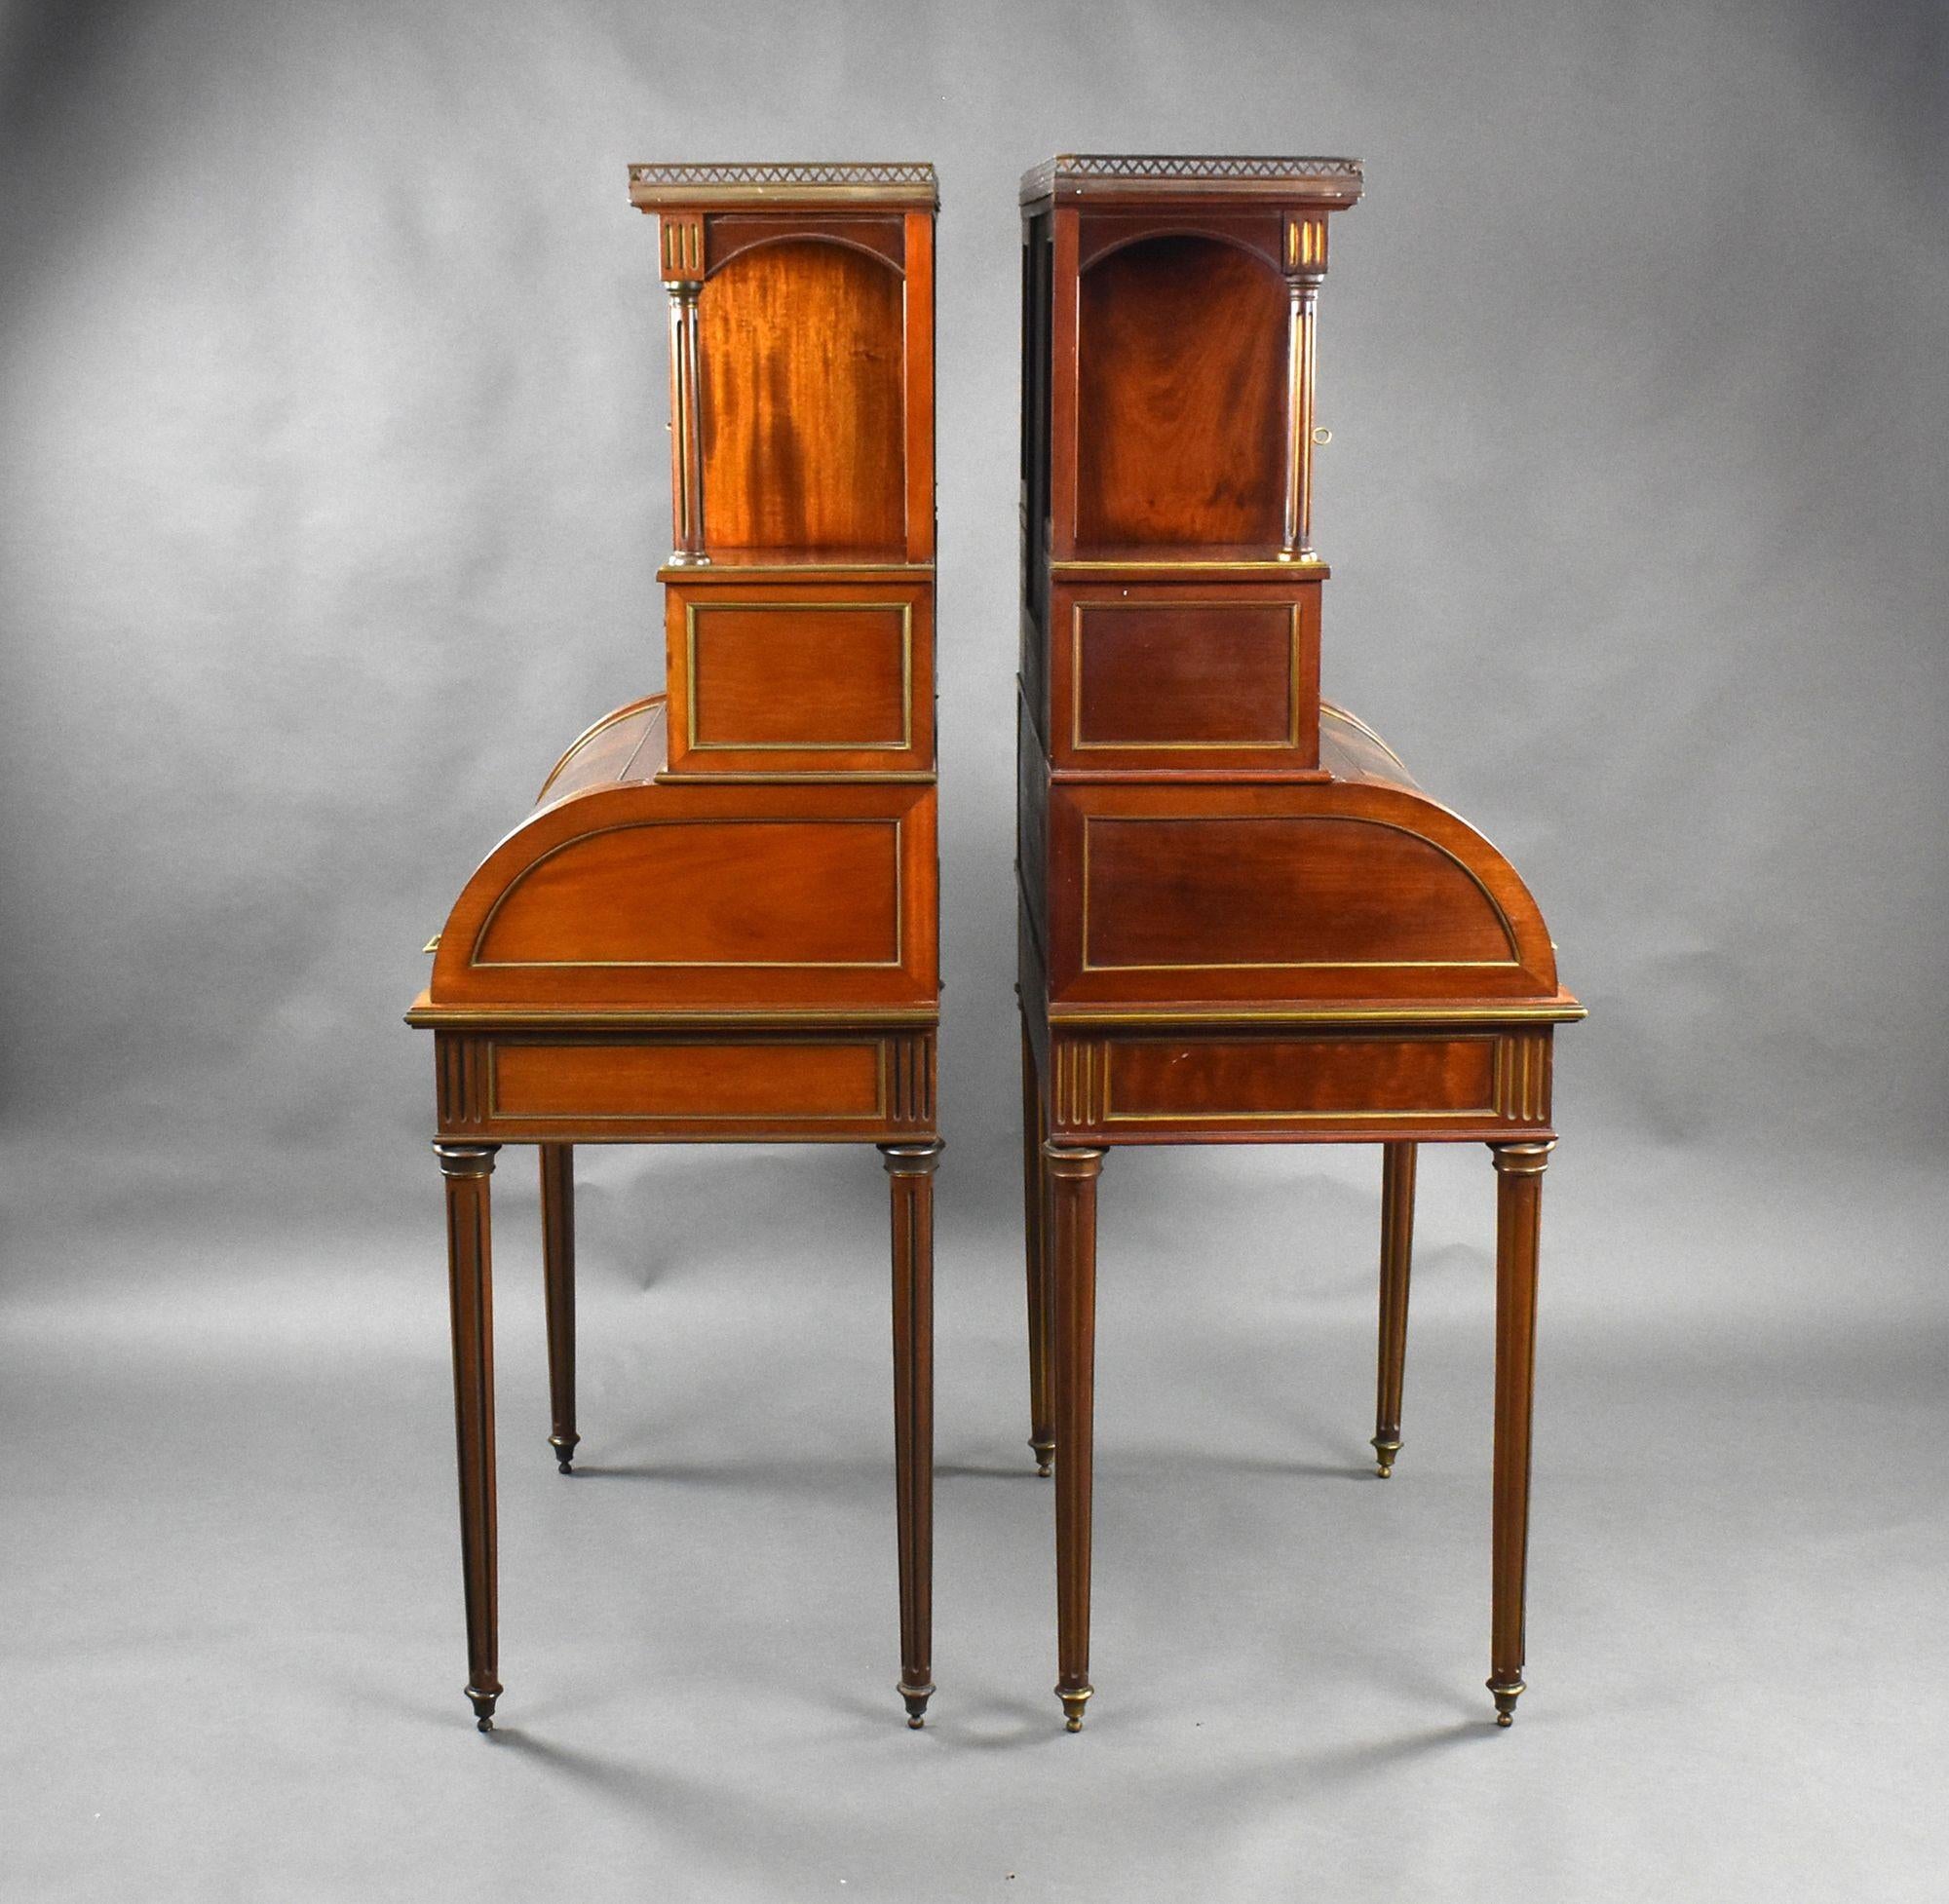 Pair of 19th Century French Vernis Martin Cylinder Top Desks For Sale 3